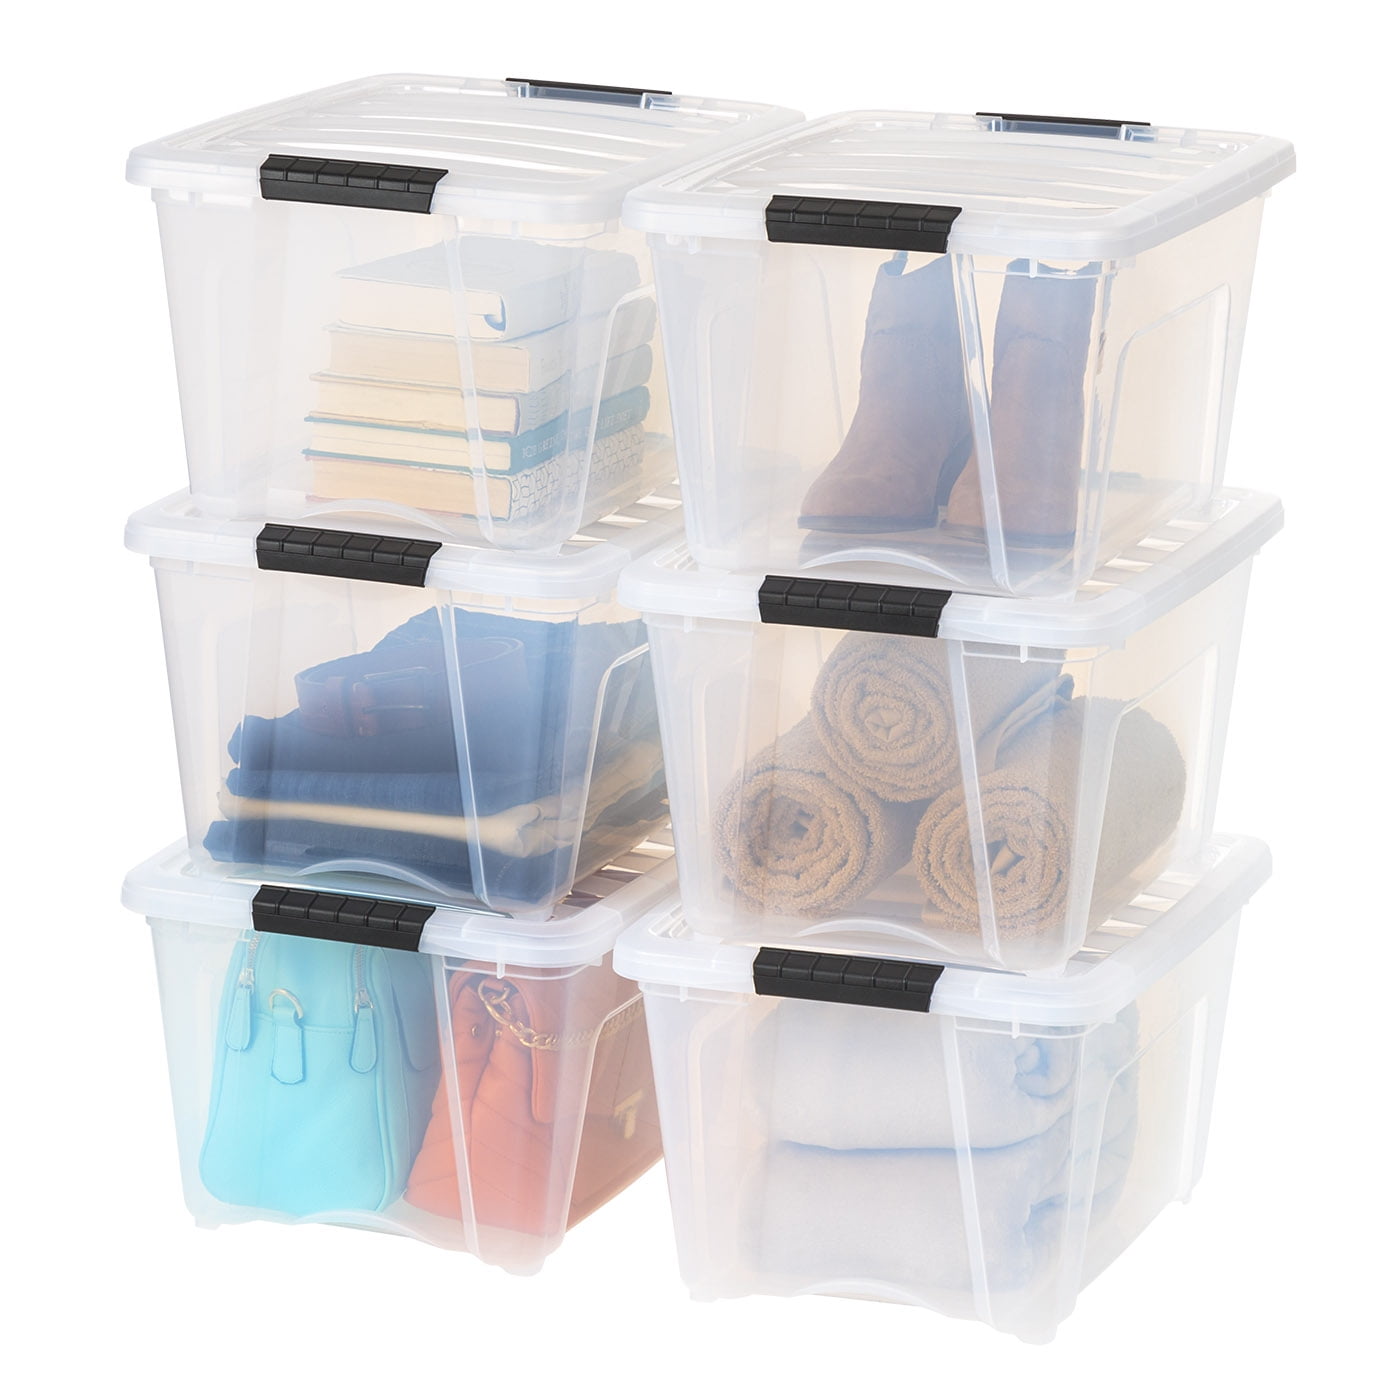 IRIS USA 72 Quart Stackable Plastic Storage Bins with Lids and Latching  Buckles, 4 Pack - Clear, Containers with Lids and Latches